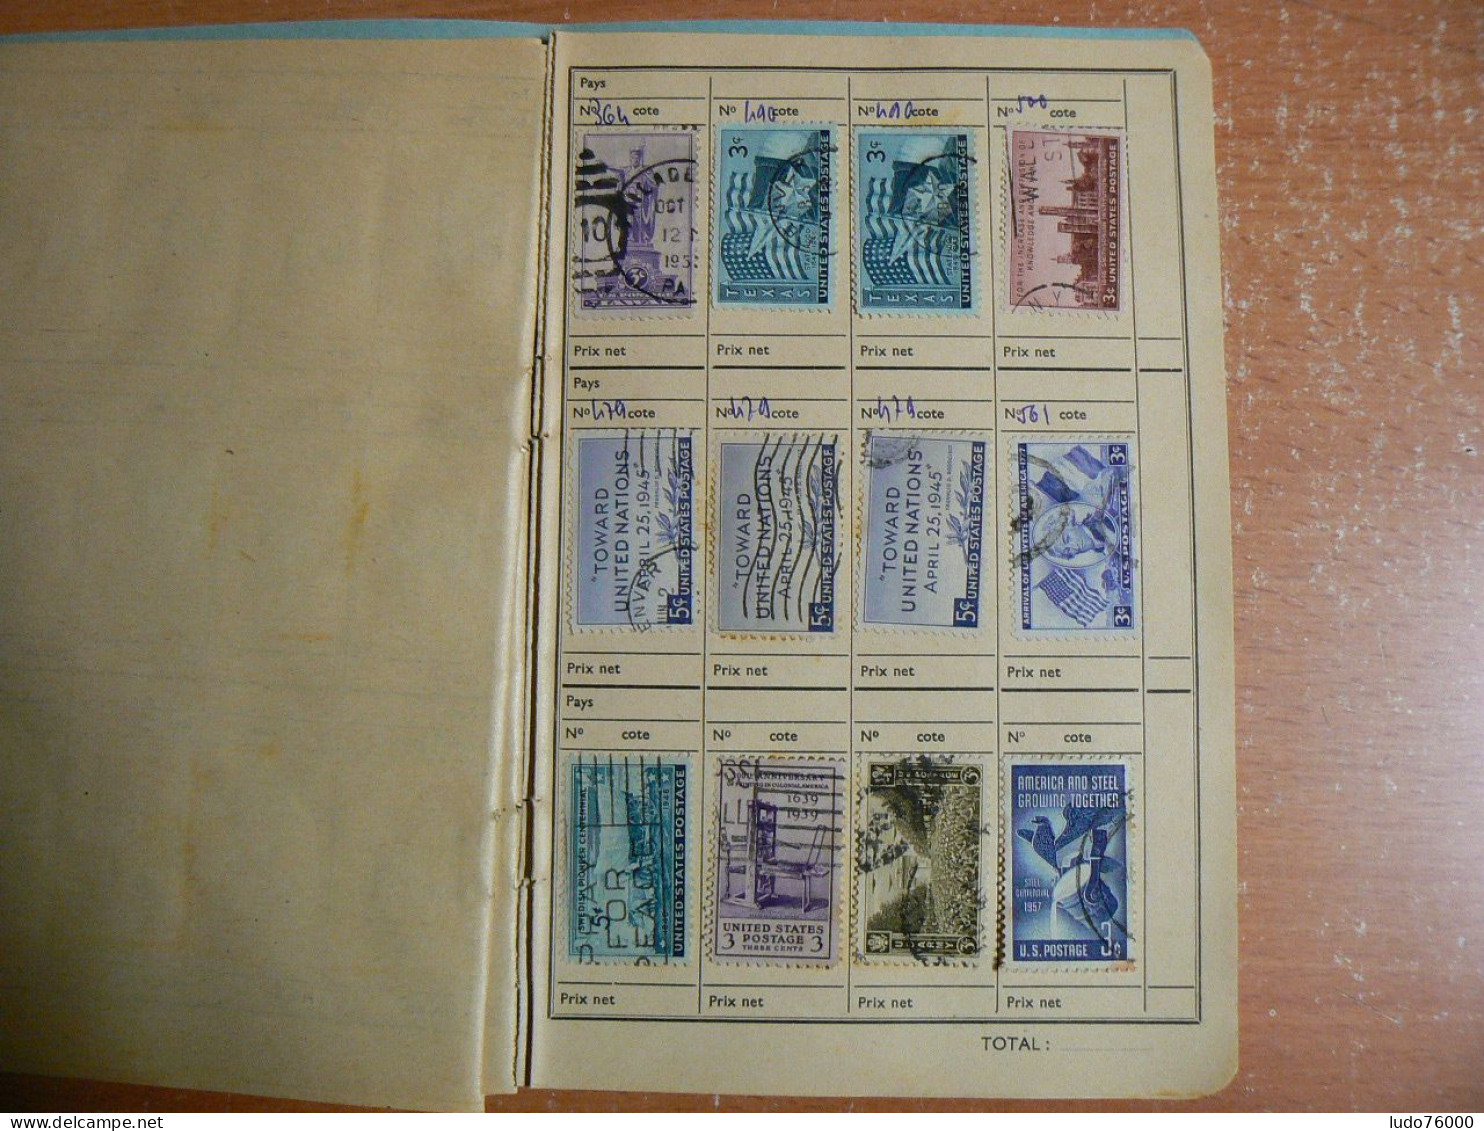 D 787 / VRAC USA / 8 PAGES / 03 - Lots & Kiloware (mixtures) - Max. 999 Stamps